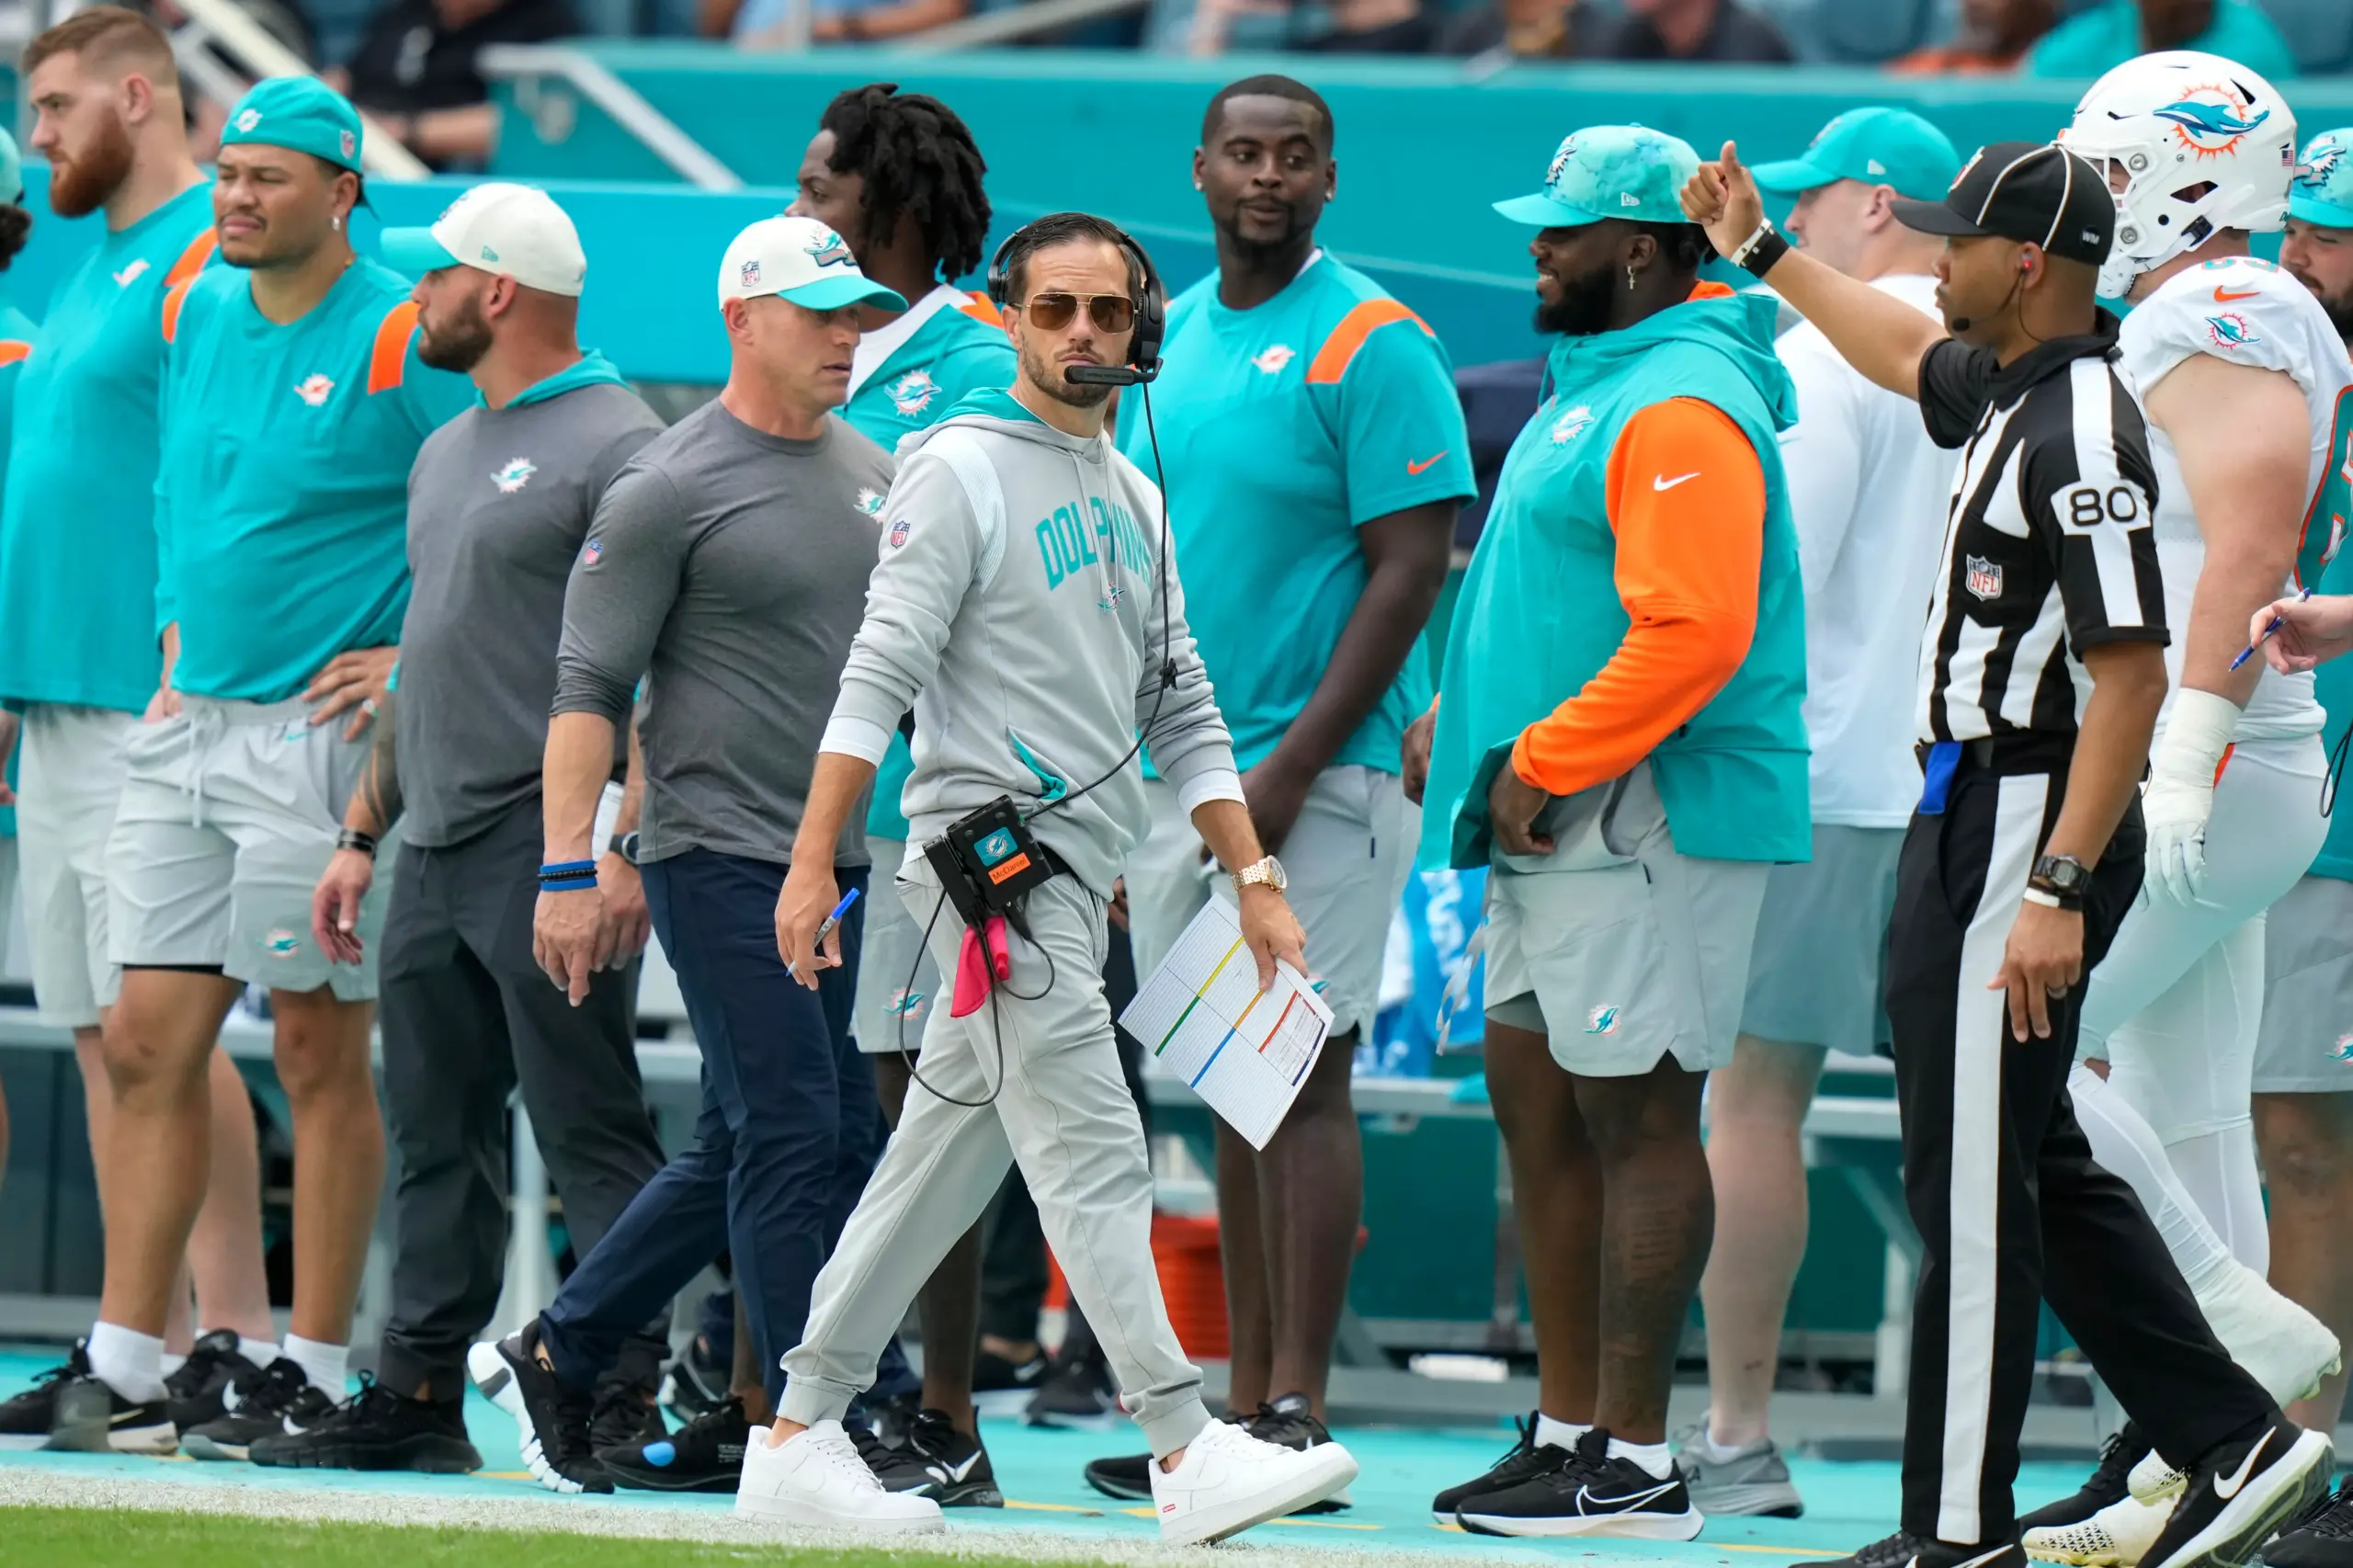 How Old is Miami Dolphins Head Coach?